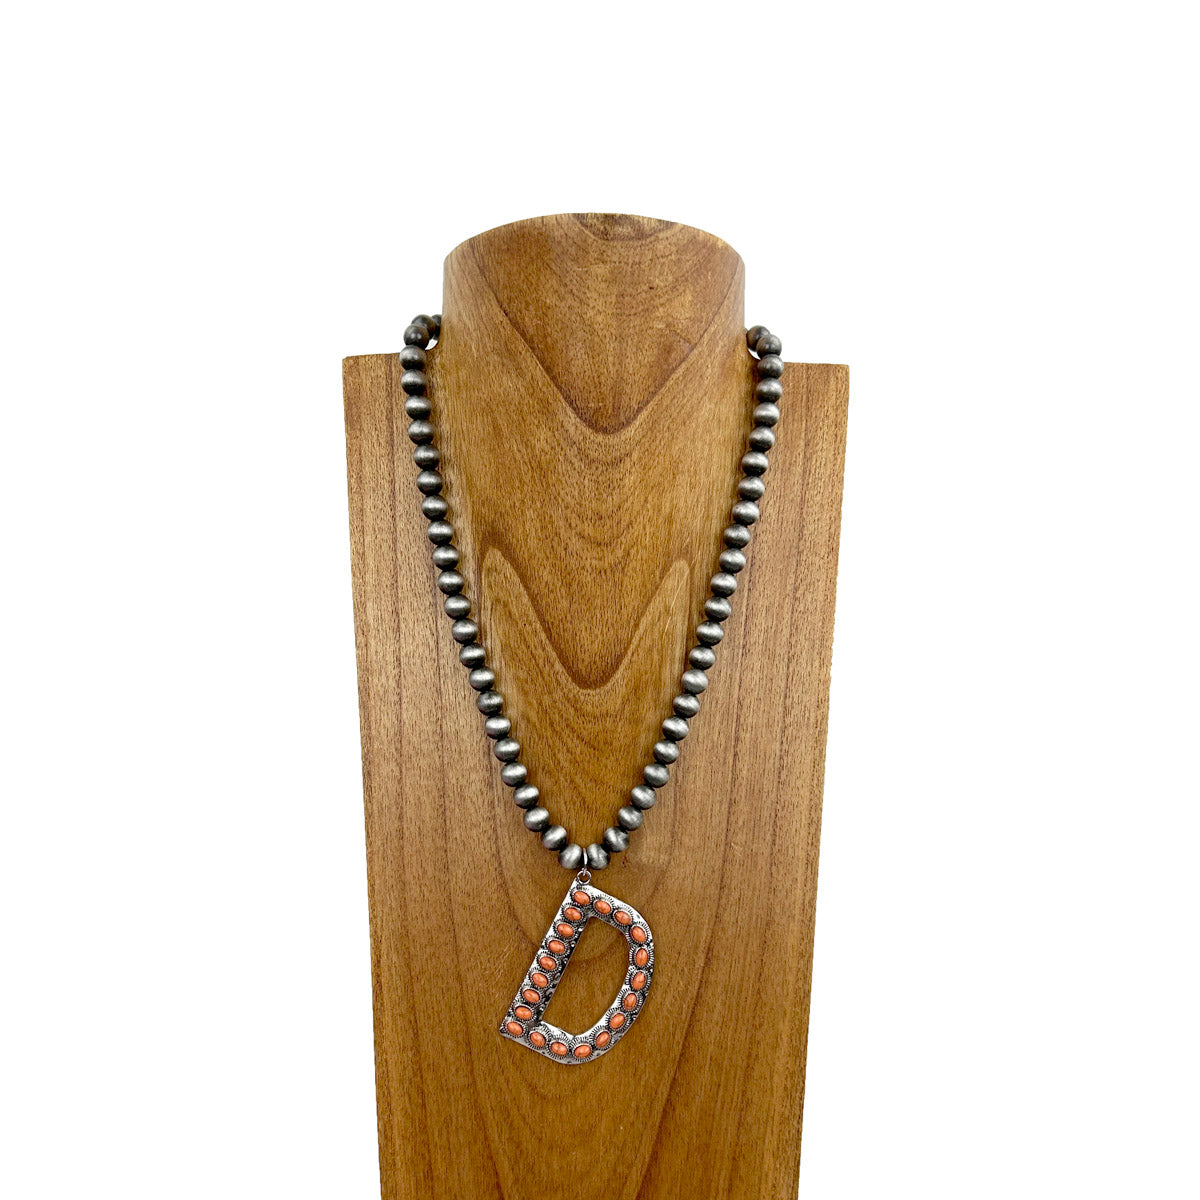 NKS230704D-PINK	21 Inches 10mm silver Navajo pearl beads with pink stone letter D pendant Necklace